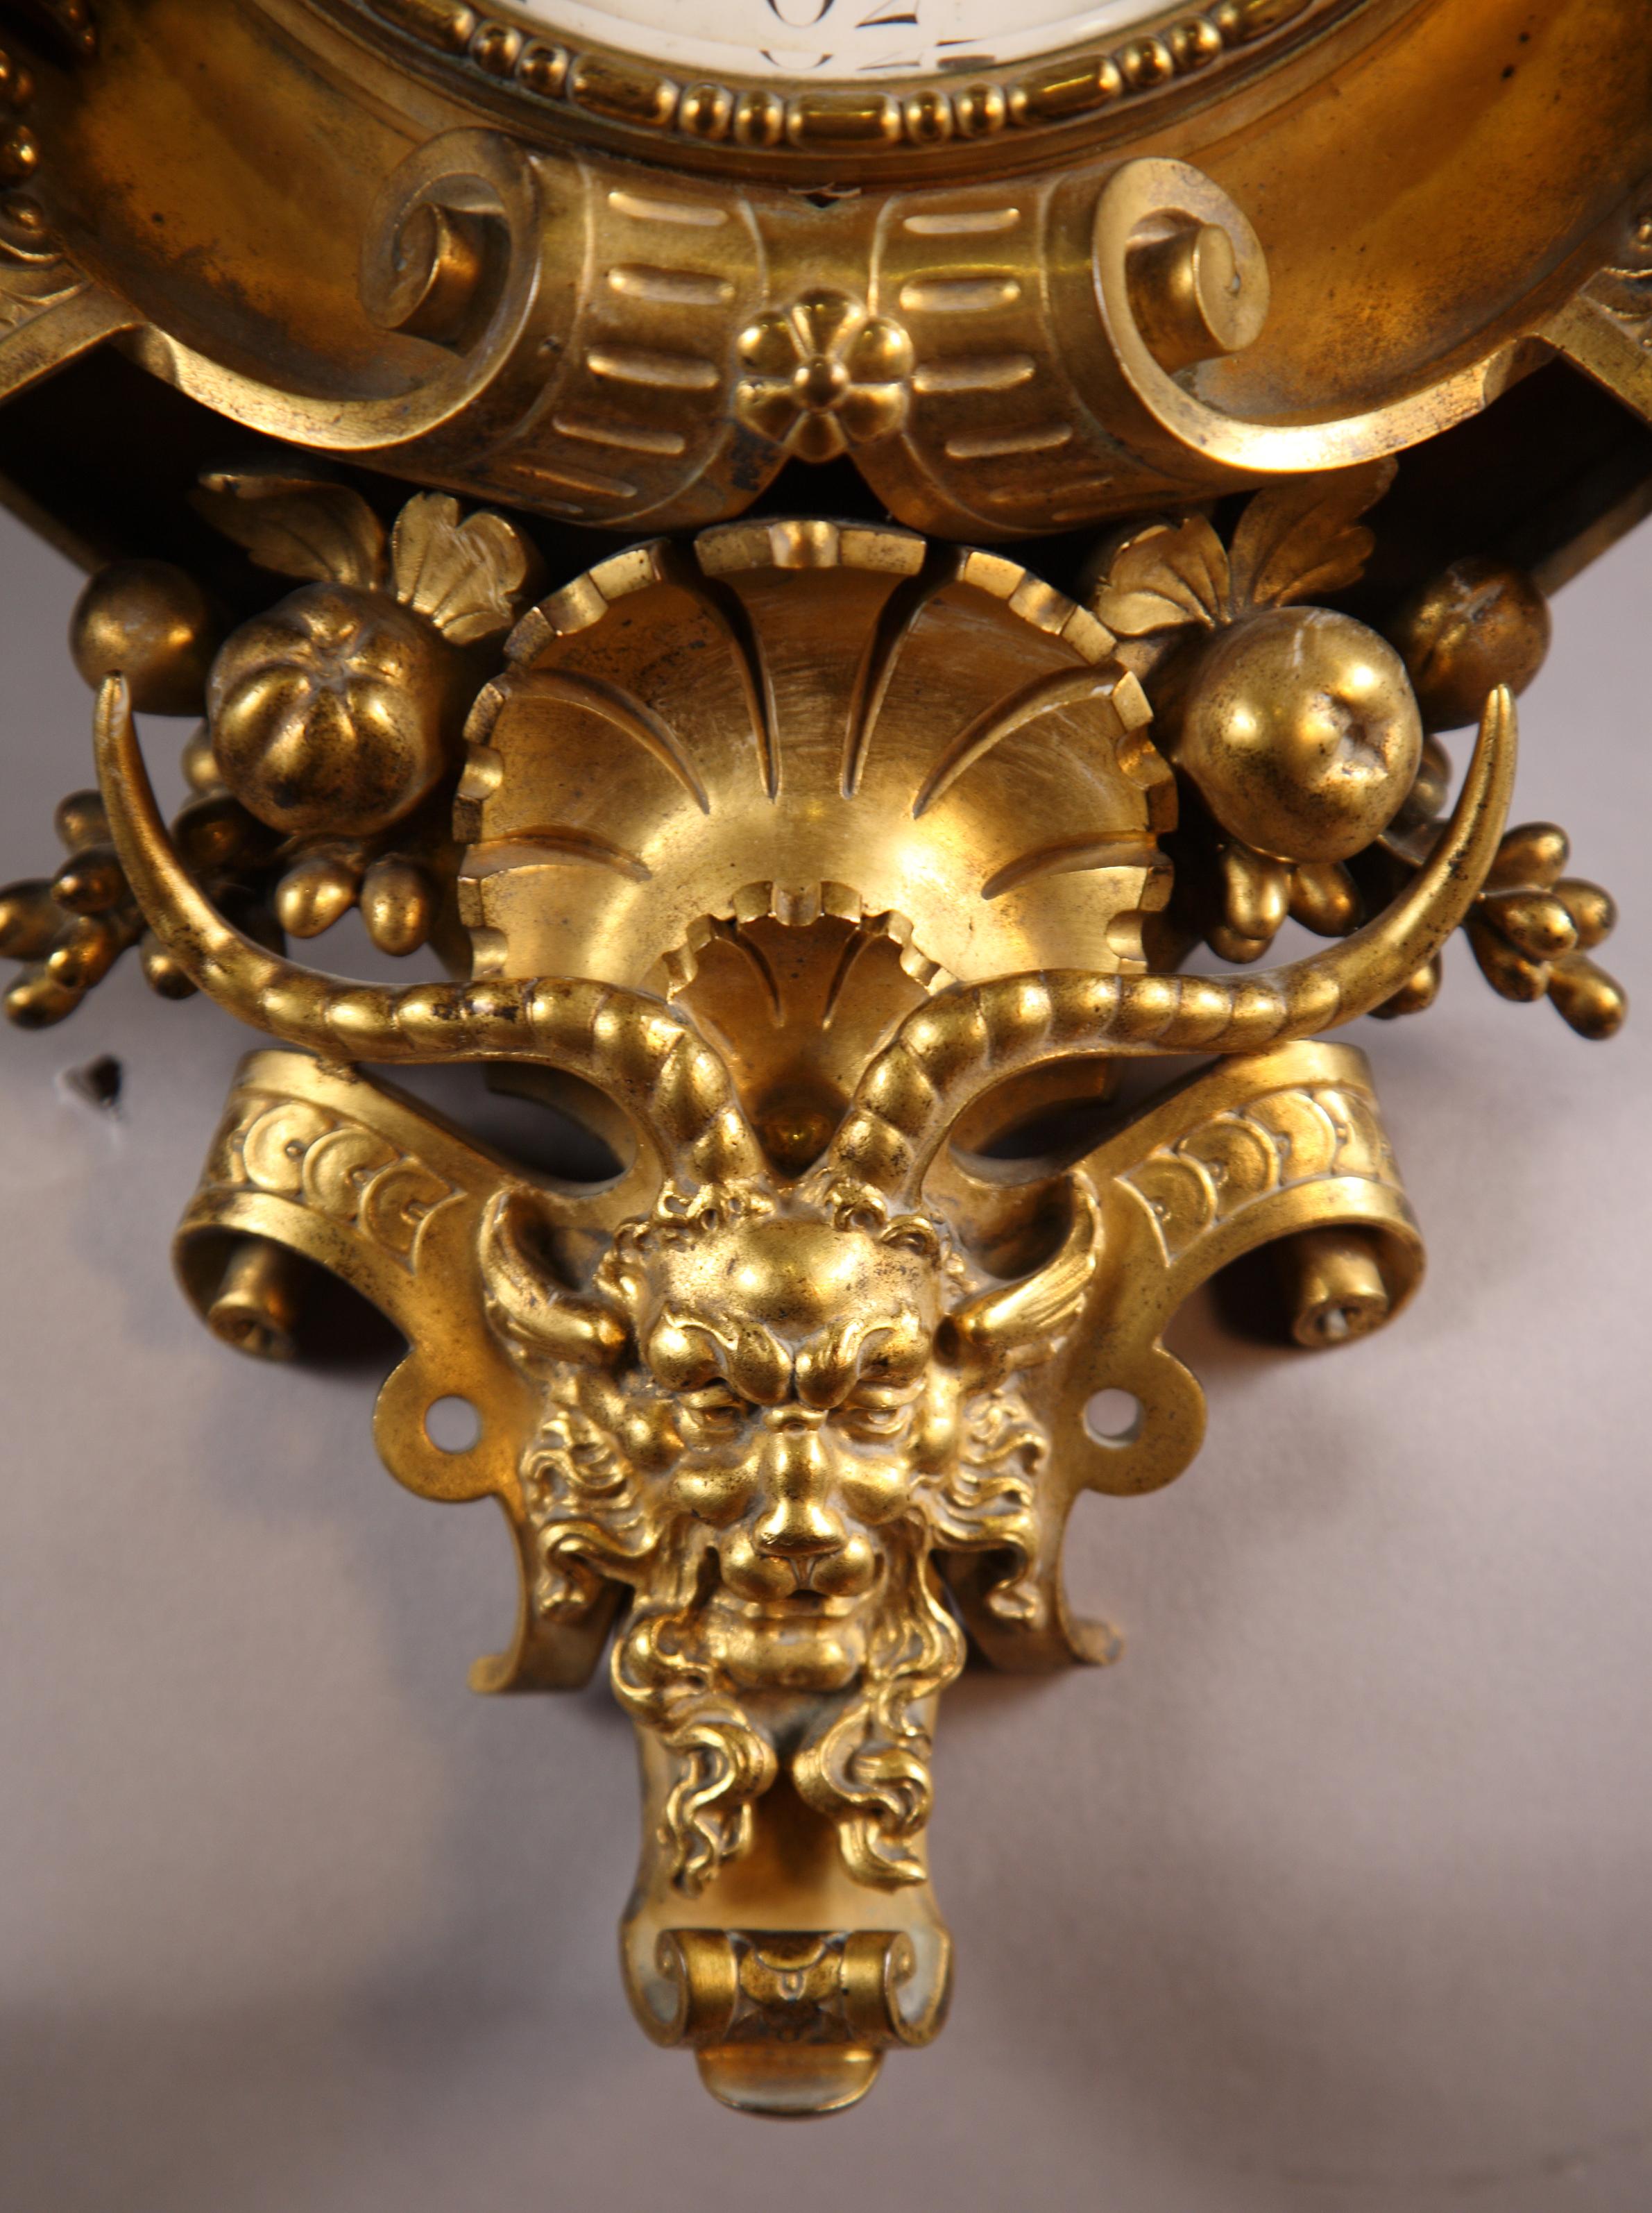 Signed on the dial F. Barbedienne à Paris

A gilt bronze wall-clock decorated with Renaissance style motifs, such as scalloped scrolls, pomegranates, a faun head and putti framing the dial.

In decorative arts, the 